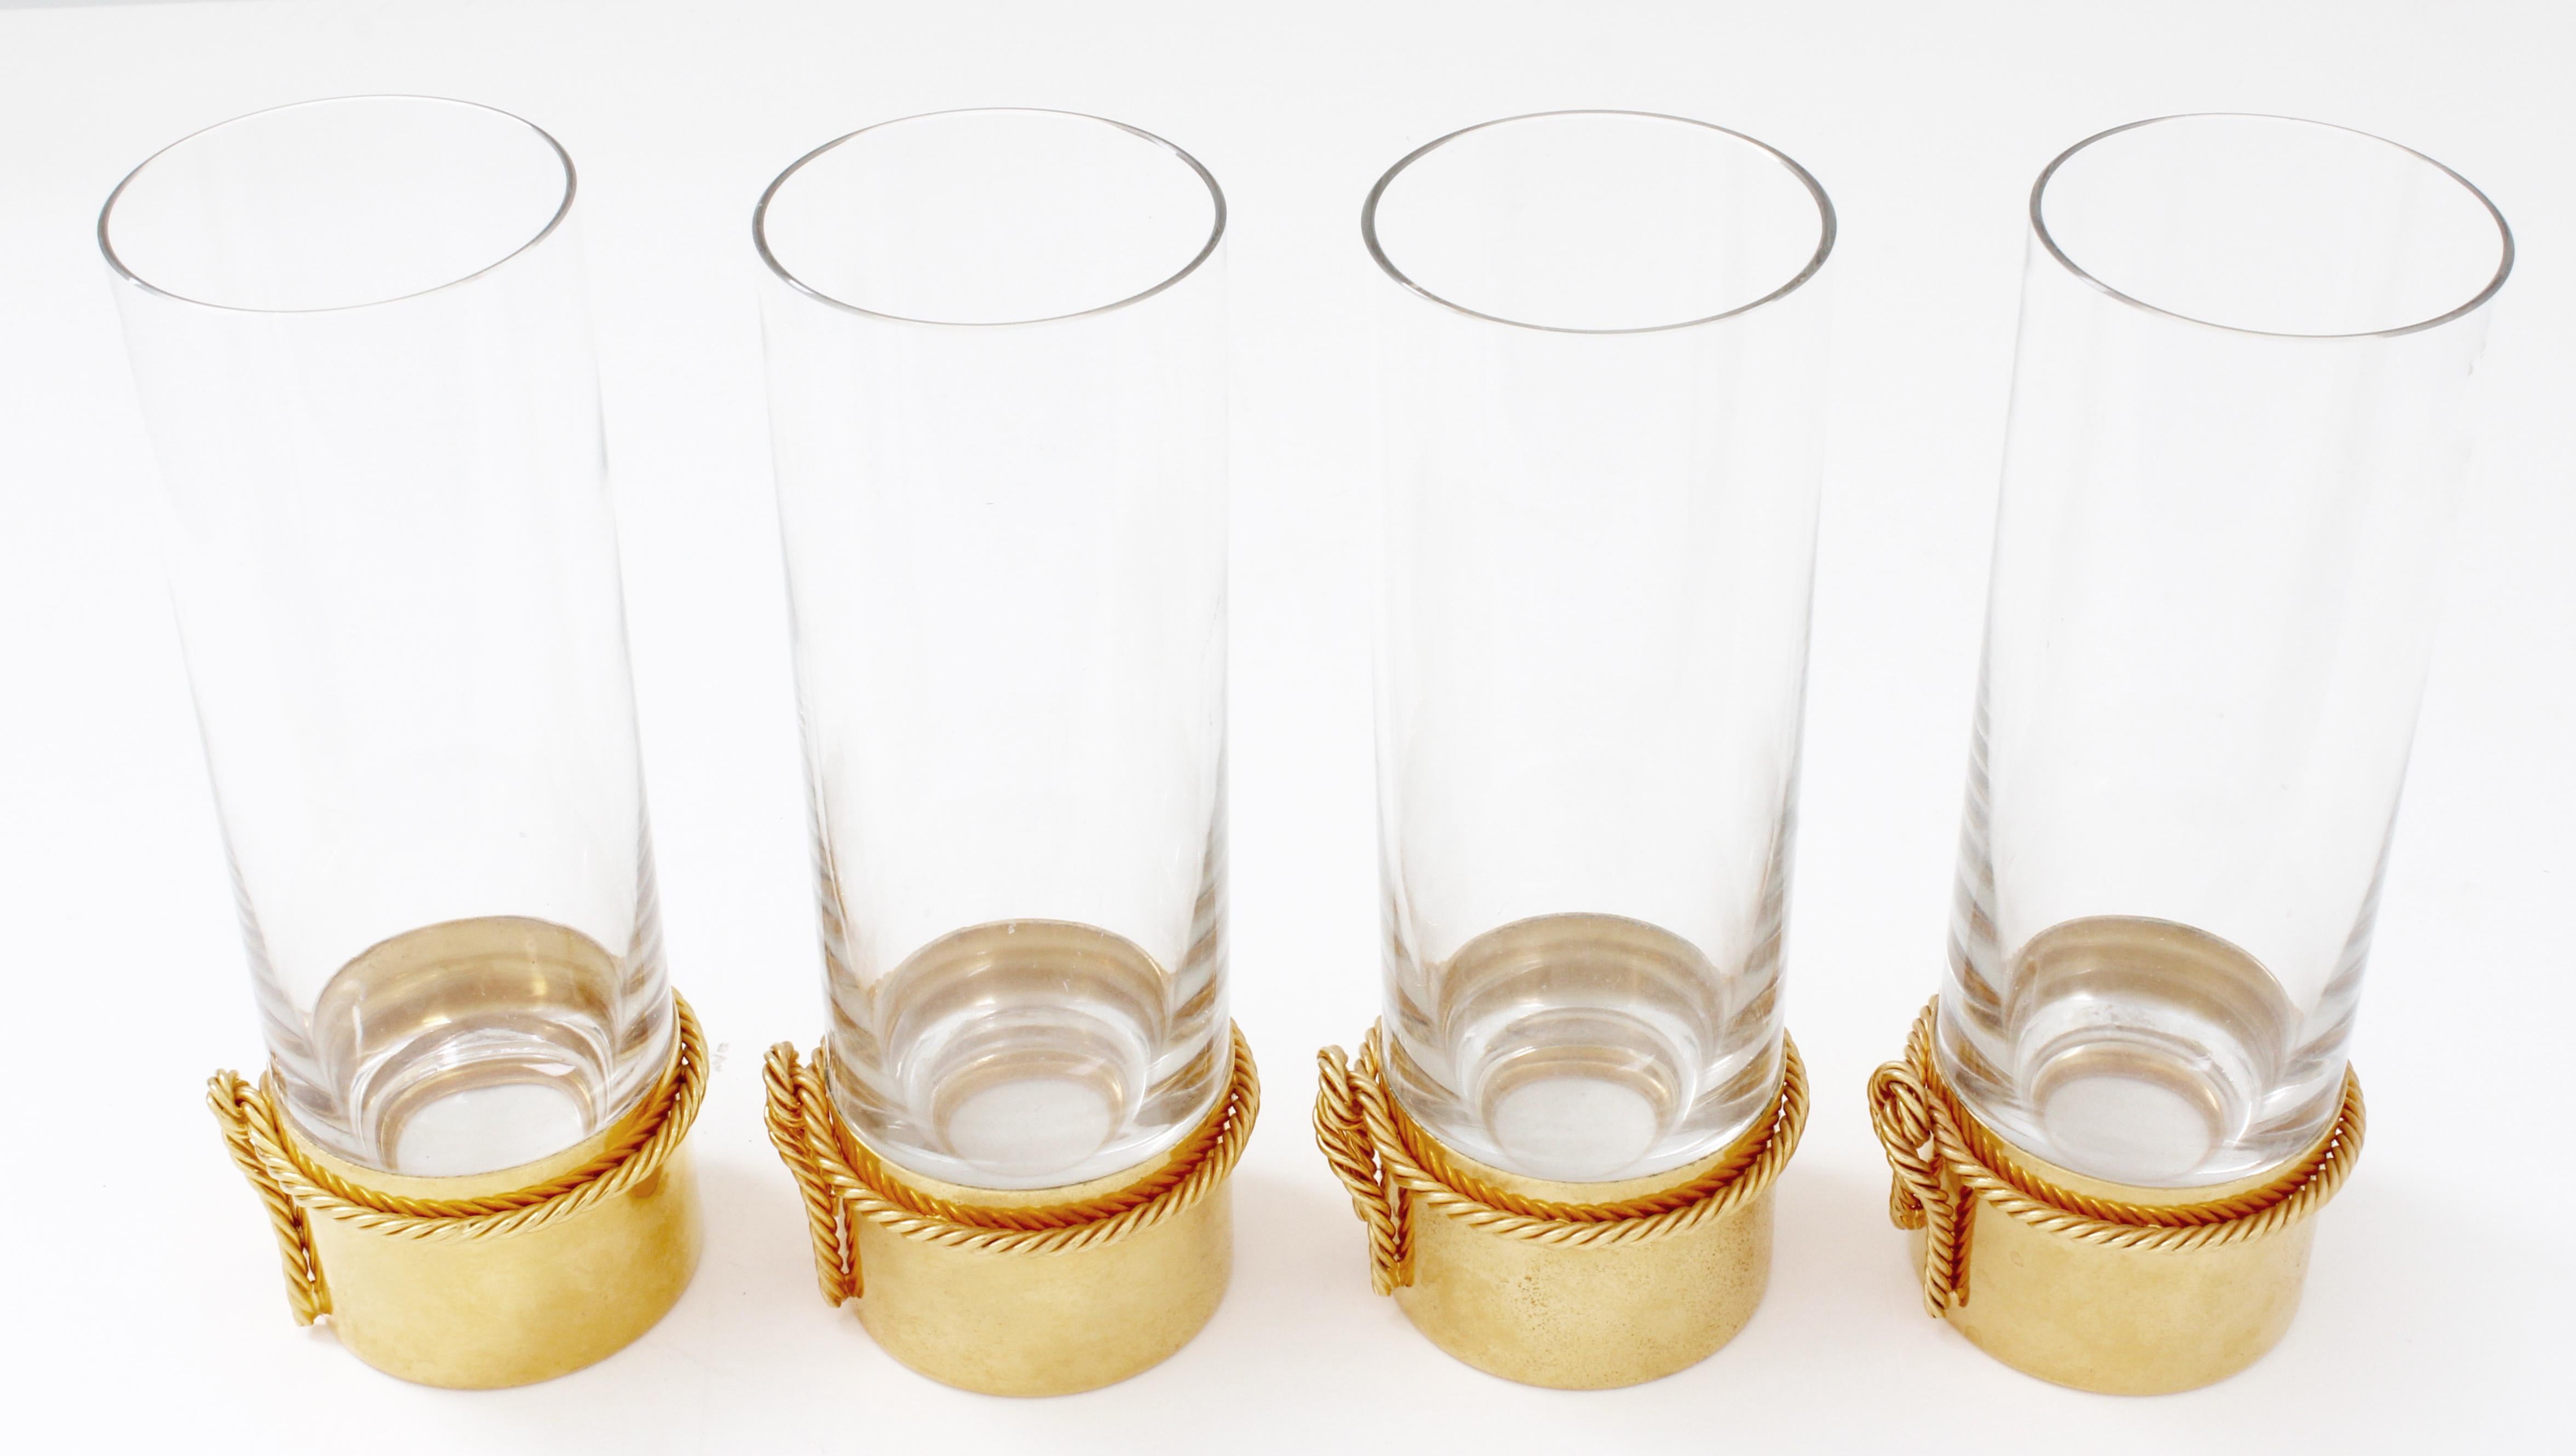 Celebrate in style with this 4pc set of super rare cocktail glasses, made in Italy by Gucci.  Made from crystal and plated in gold, they feature twisted rope detailing at the base.  Each glass measures approximately 6.5in H x 2.25in across the top,